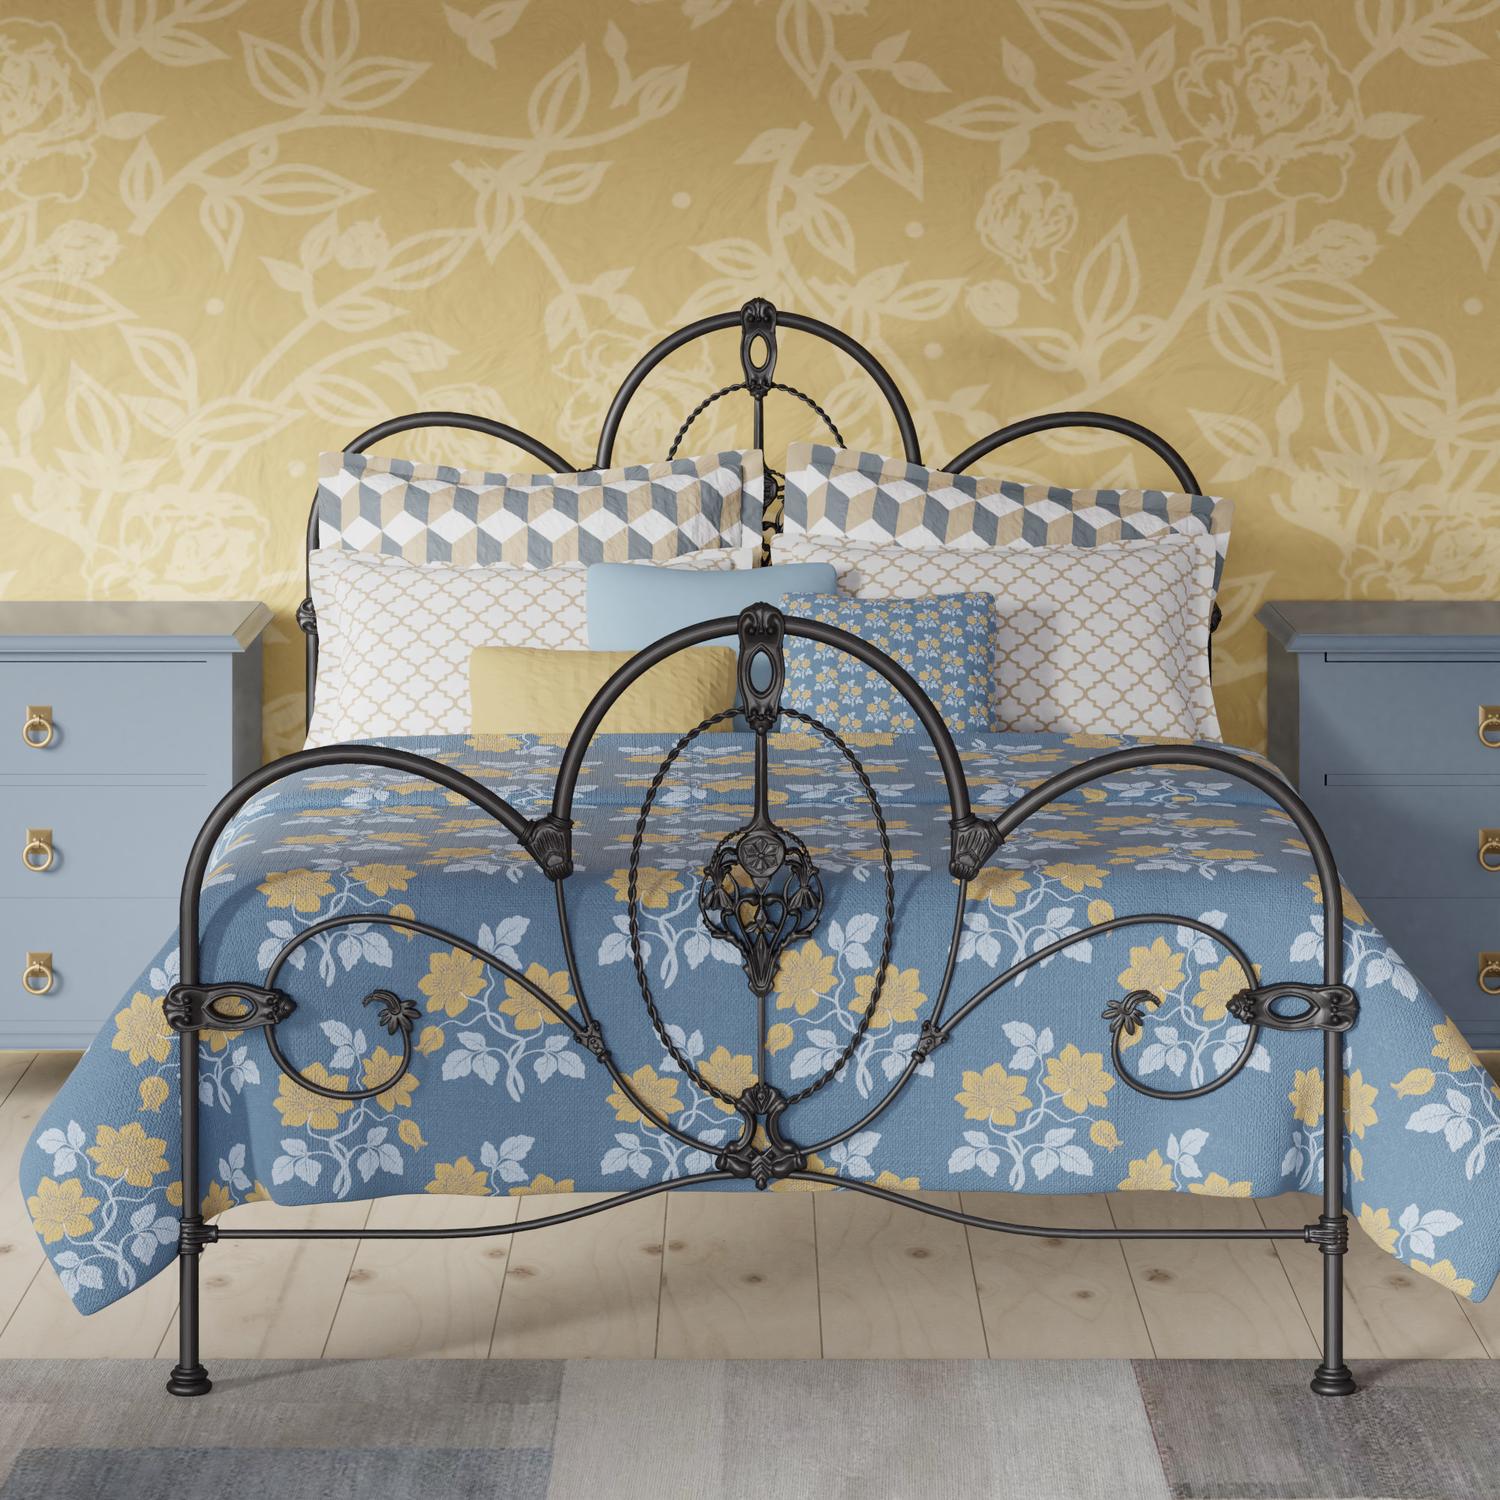 Ballina iron bed frame - Blue and yellow bedroom